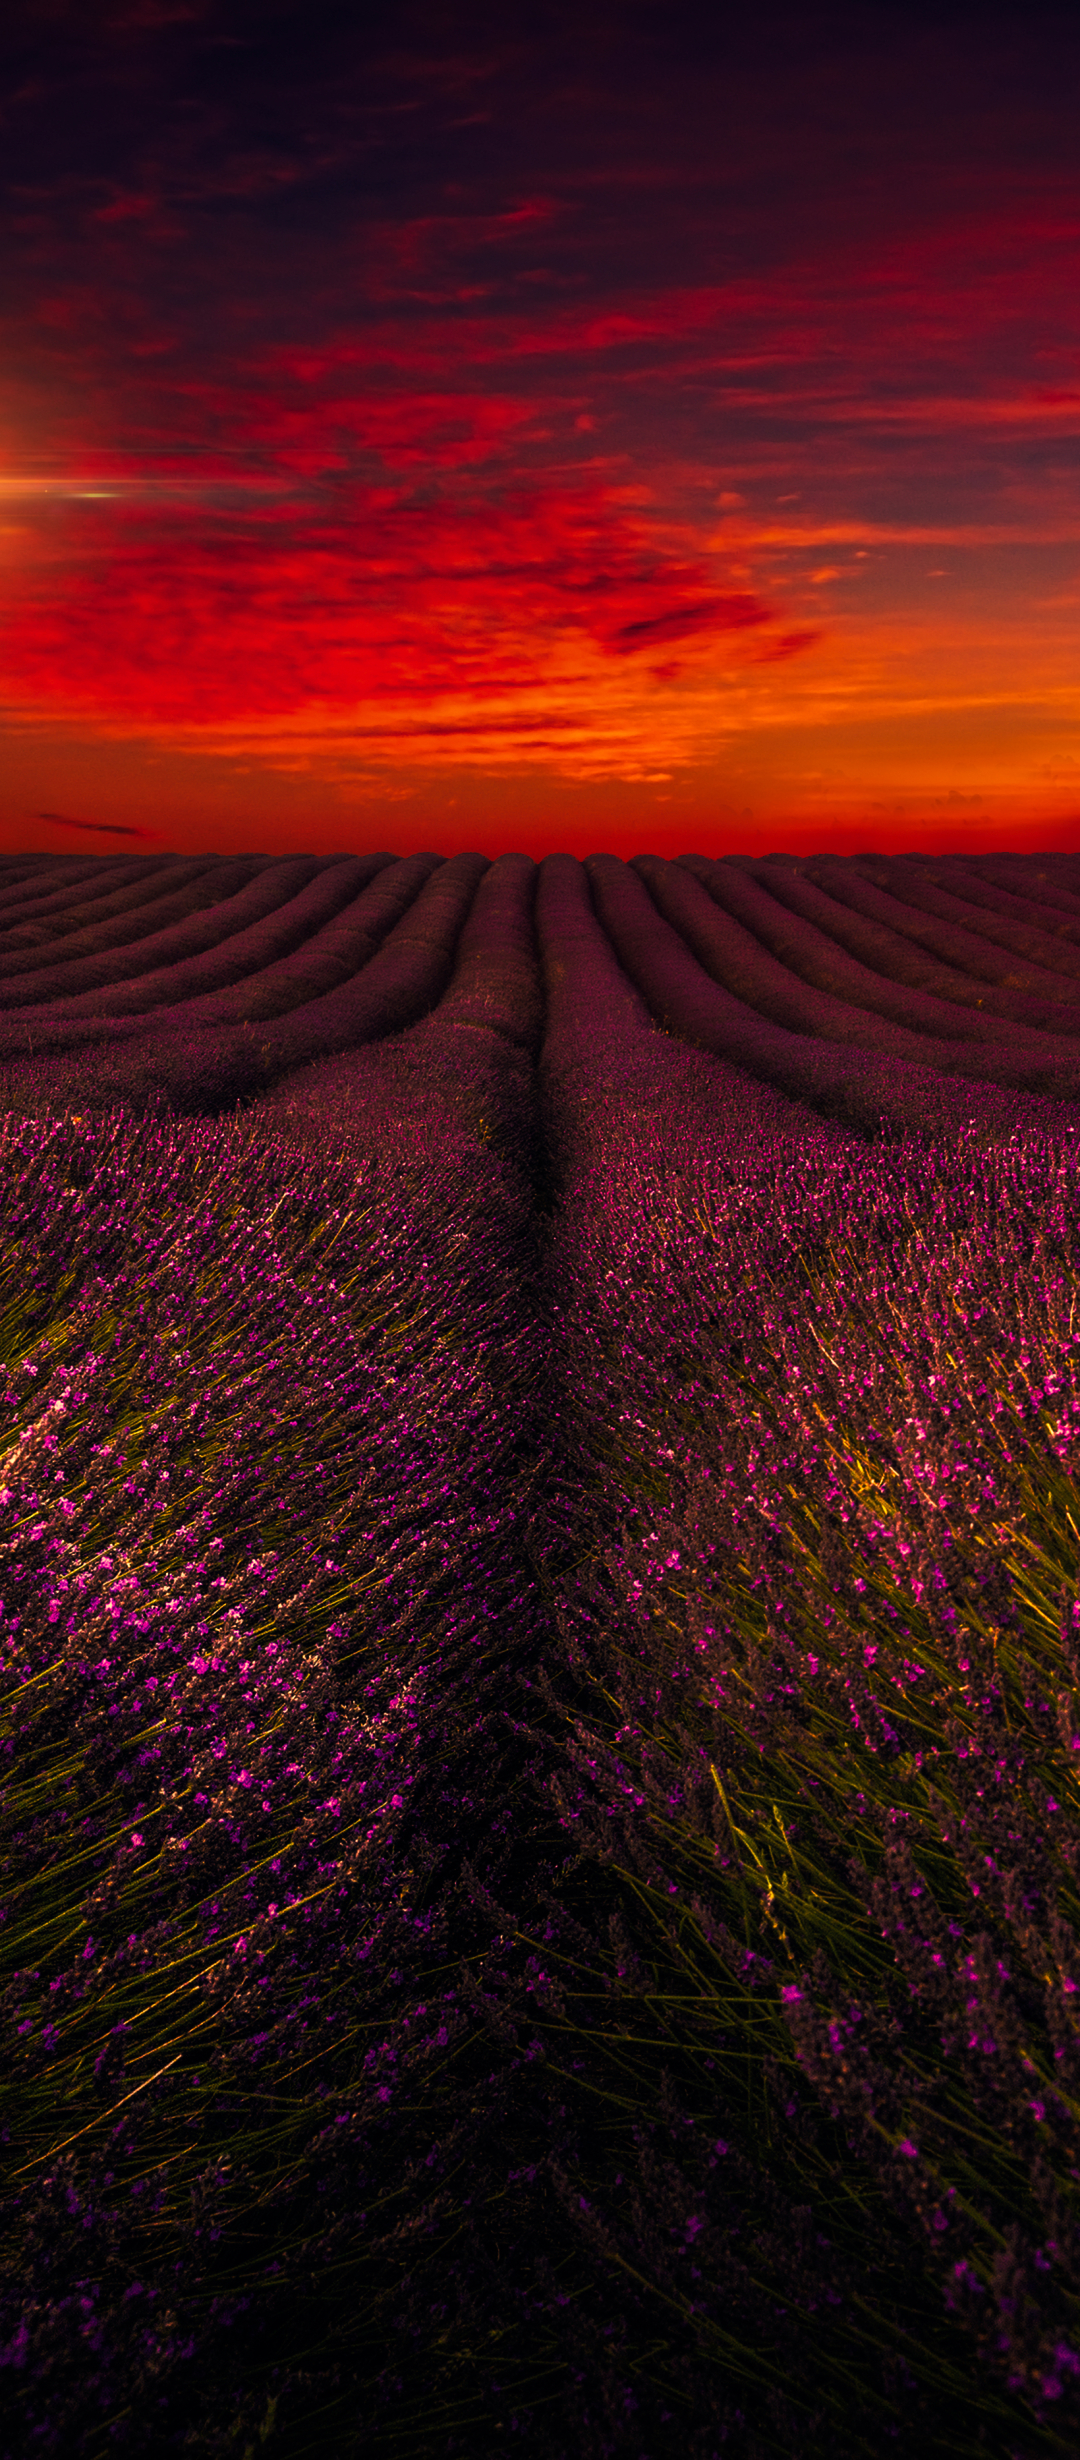 Dark Sunset over Lighthouse and Lavender Field